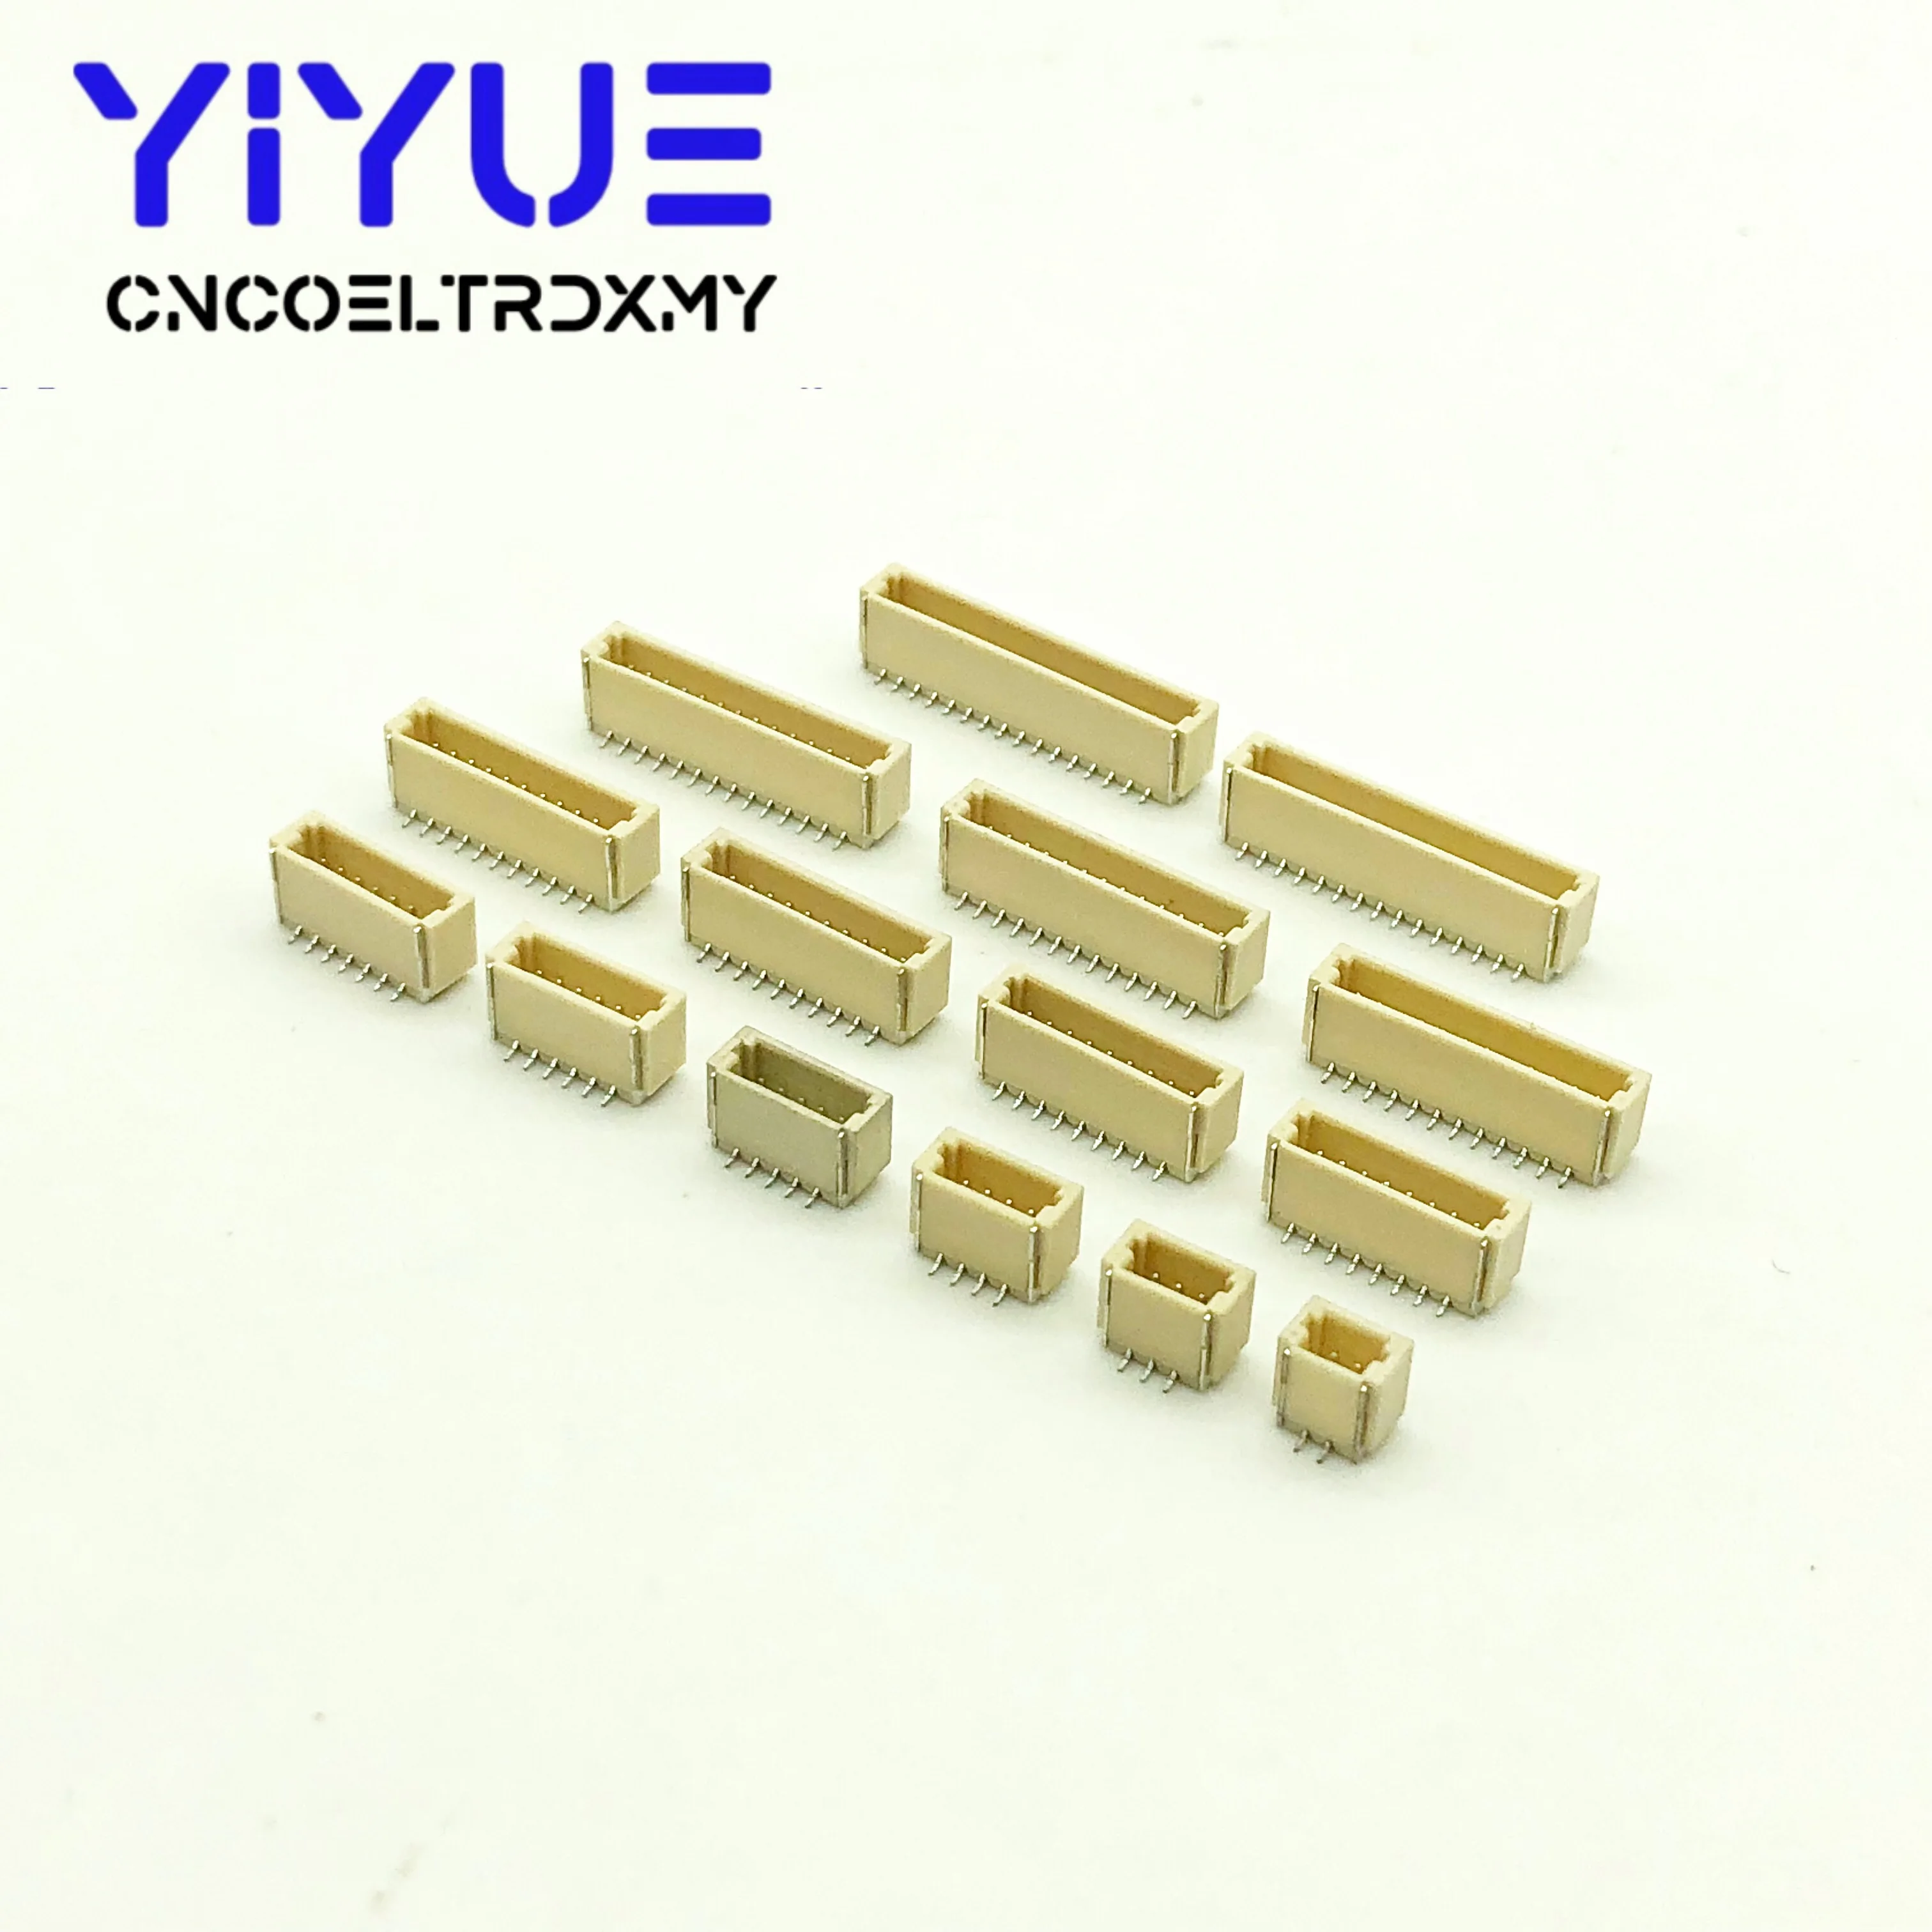 

20Pcs/lot SH 1.0 mm Spacing Connector 2P/3P/4P/5P/6P/7P/8P/9P/10P/11P/12P vertical SMD Connector 1.0mm pitch patch plug